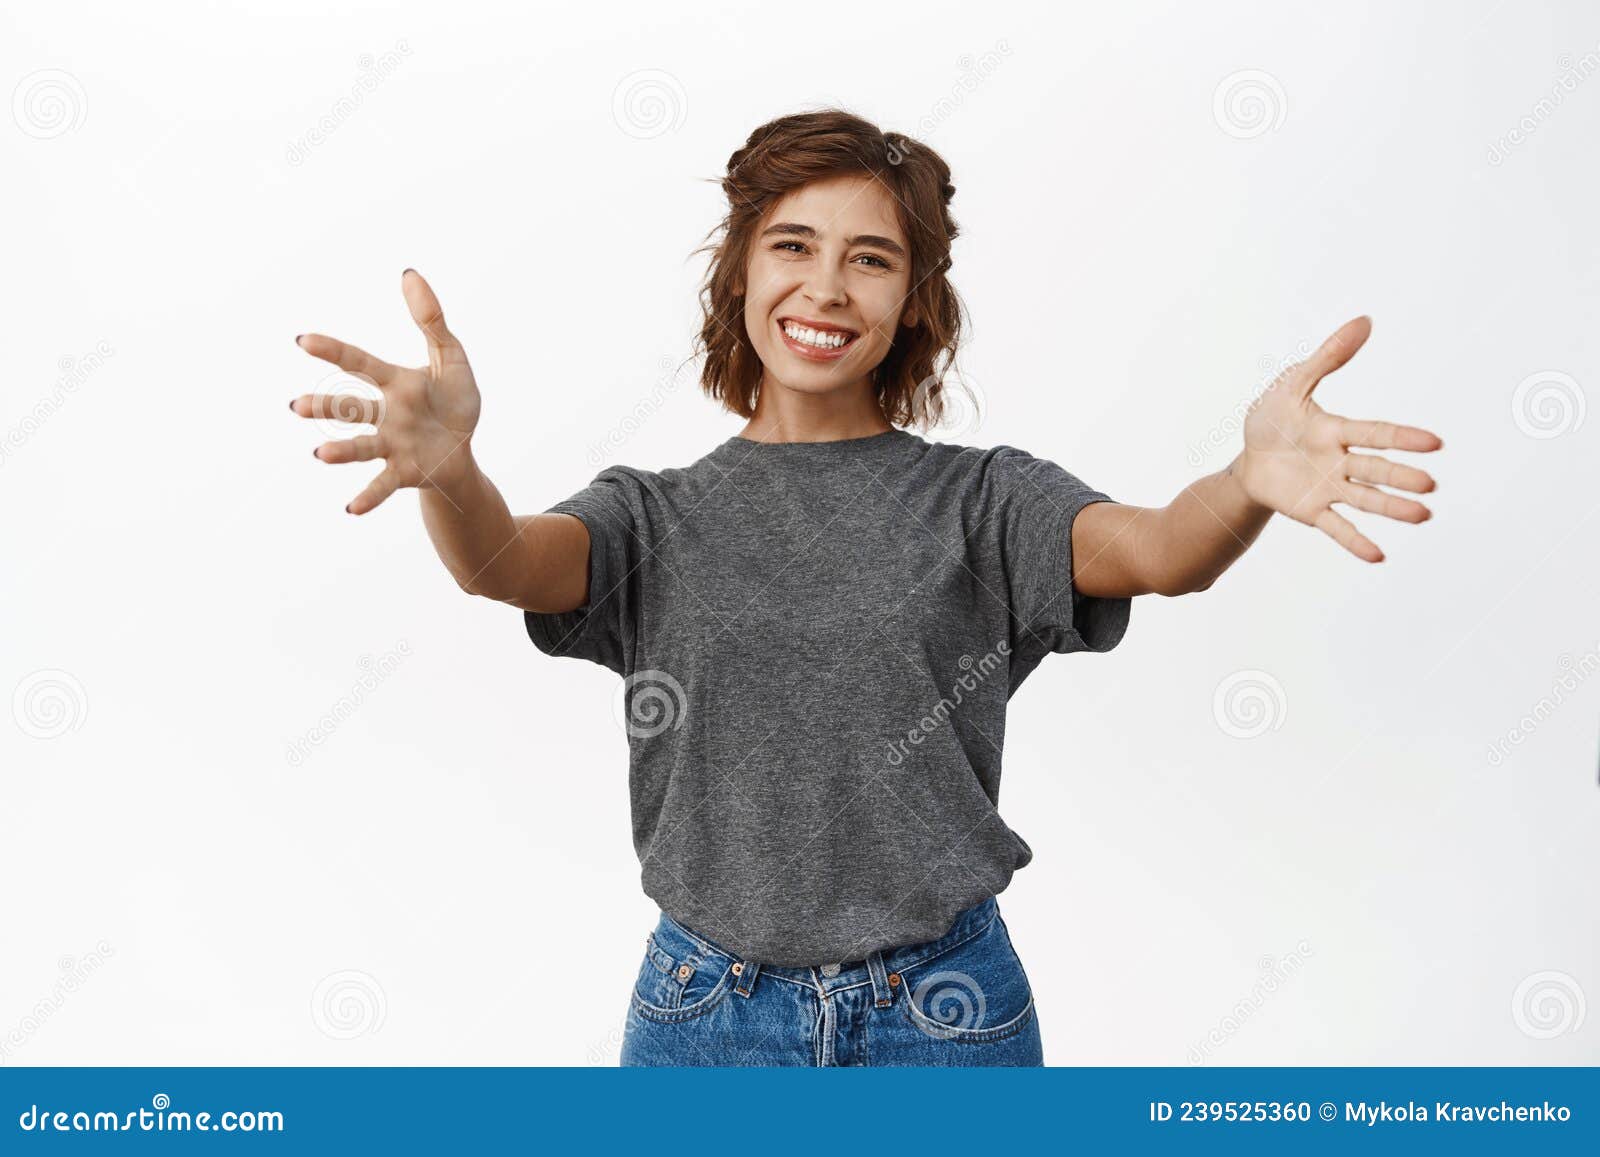 Come Here Smiling Young Woman Reaching Arms Stretching Hands To